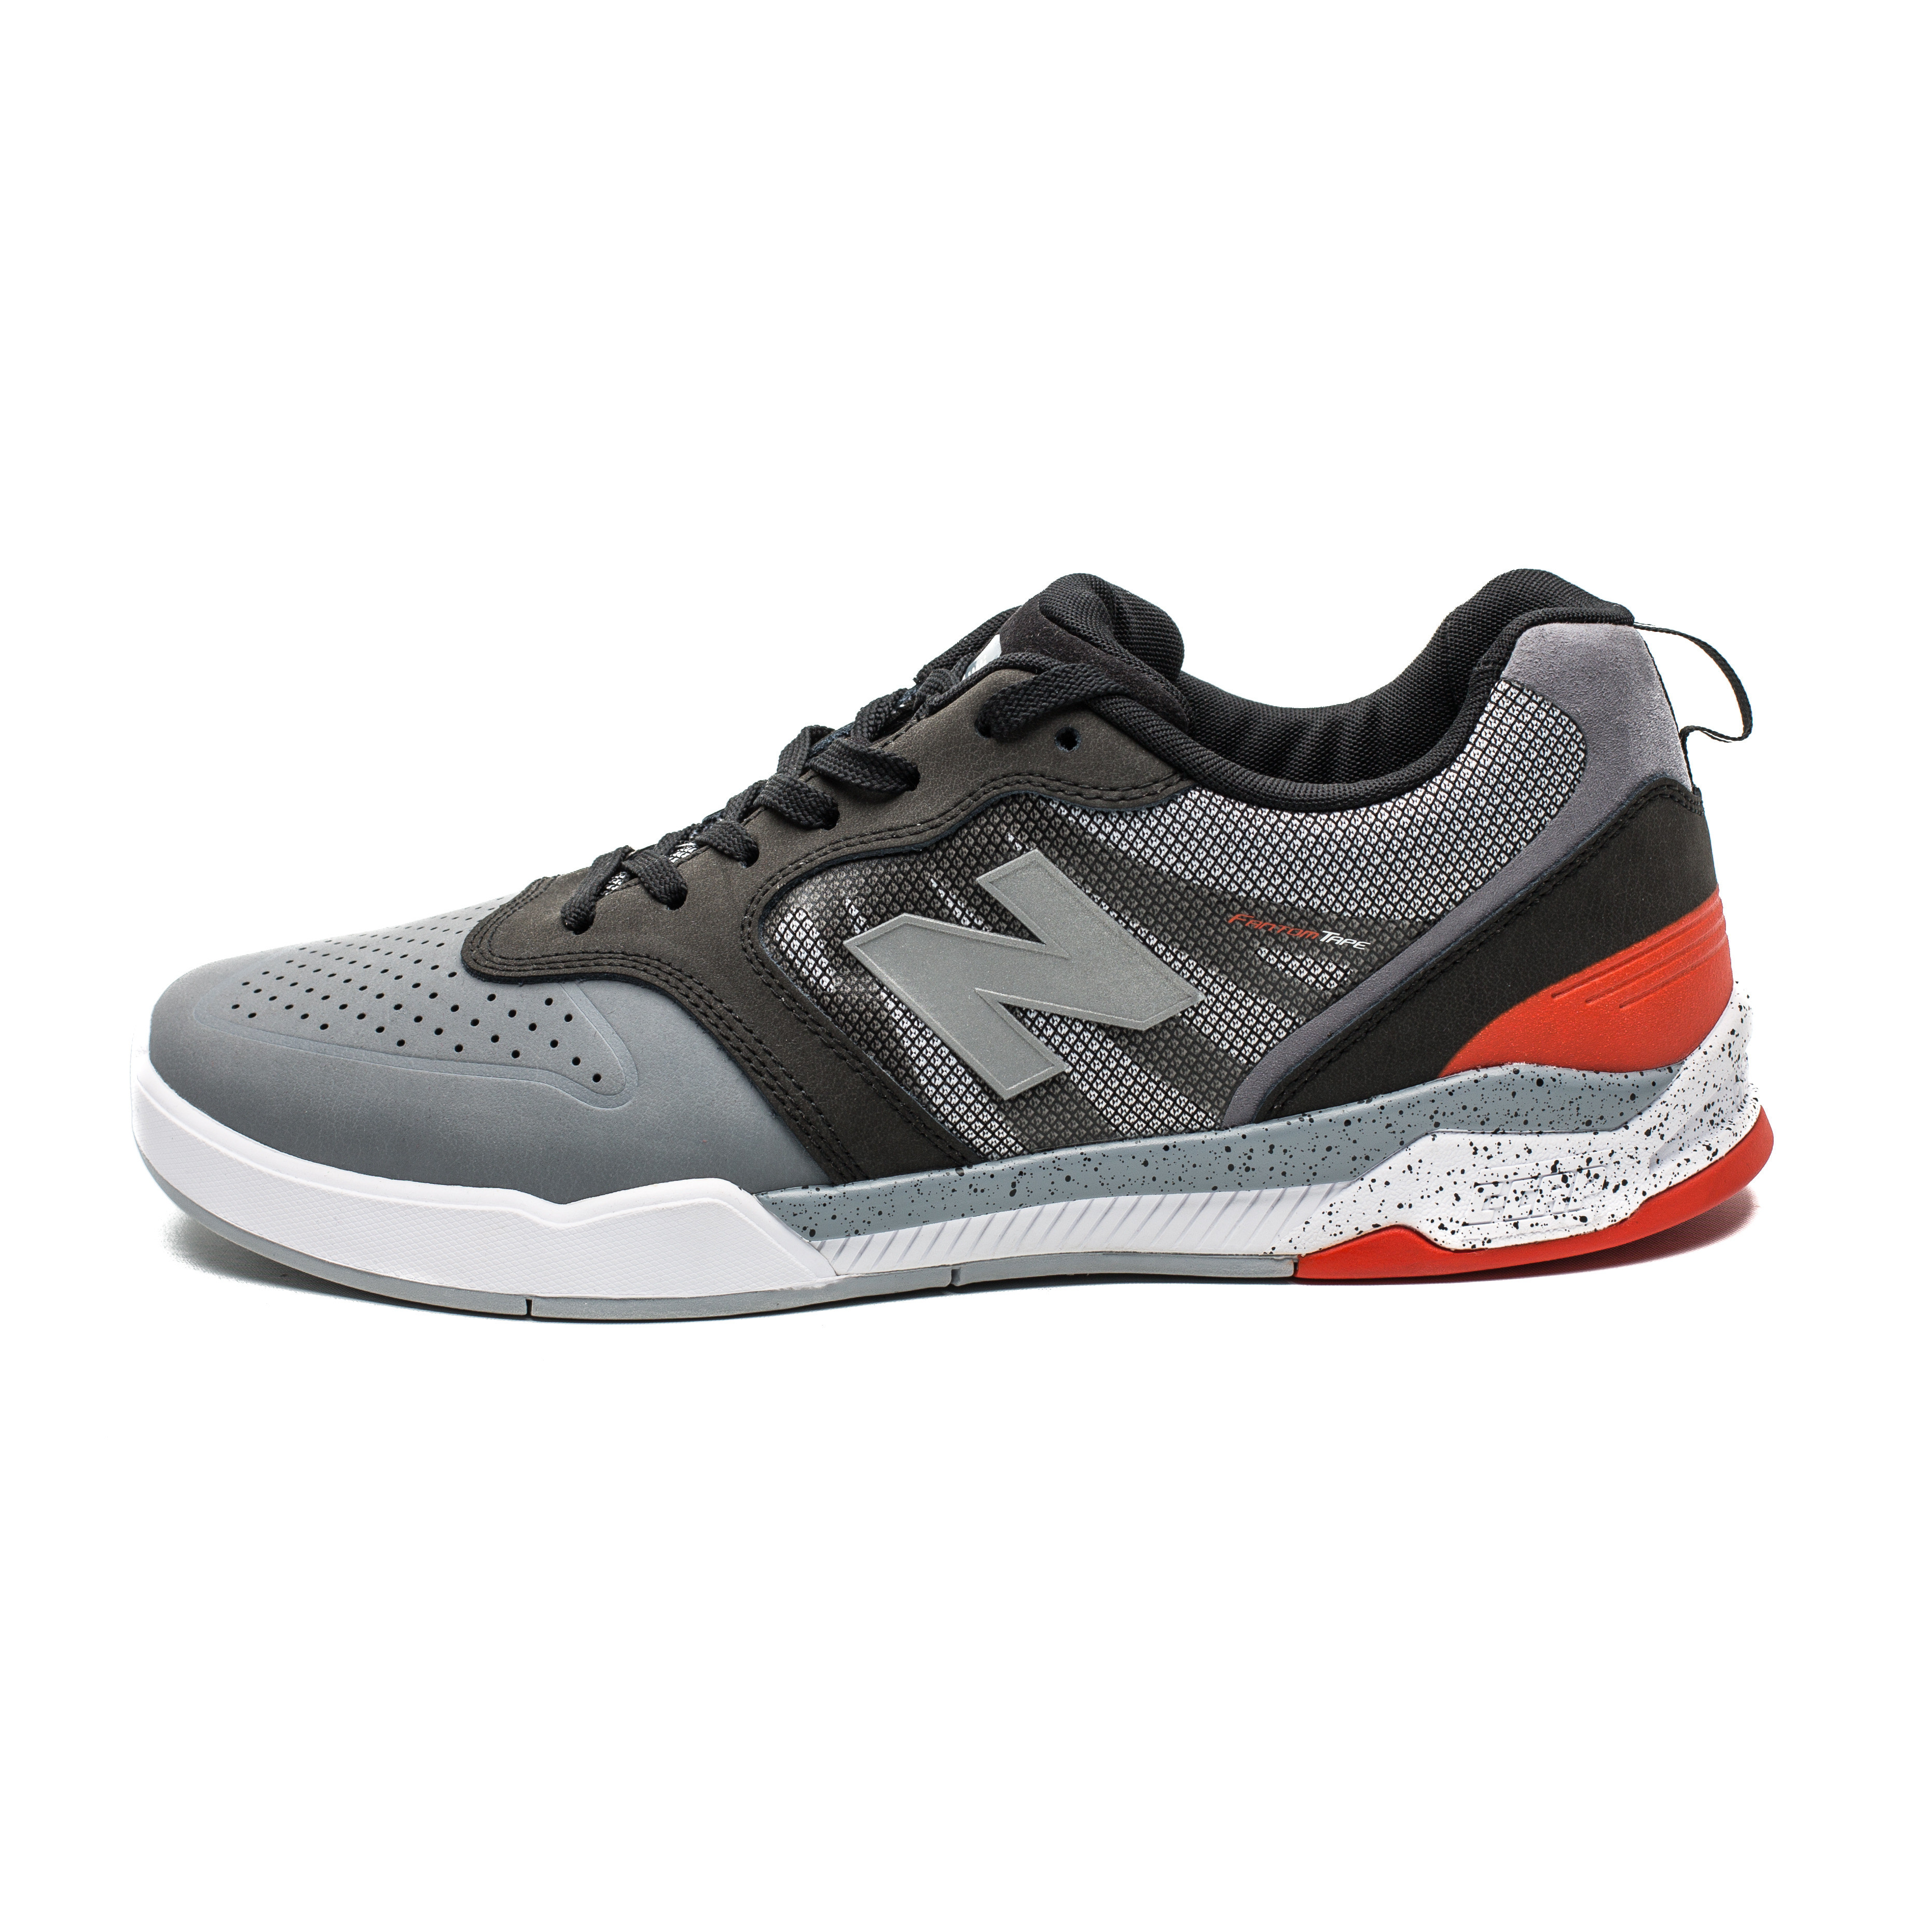 New Balance Numeric 868 - Weartested 